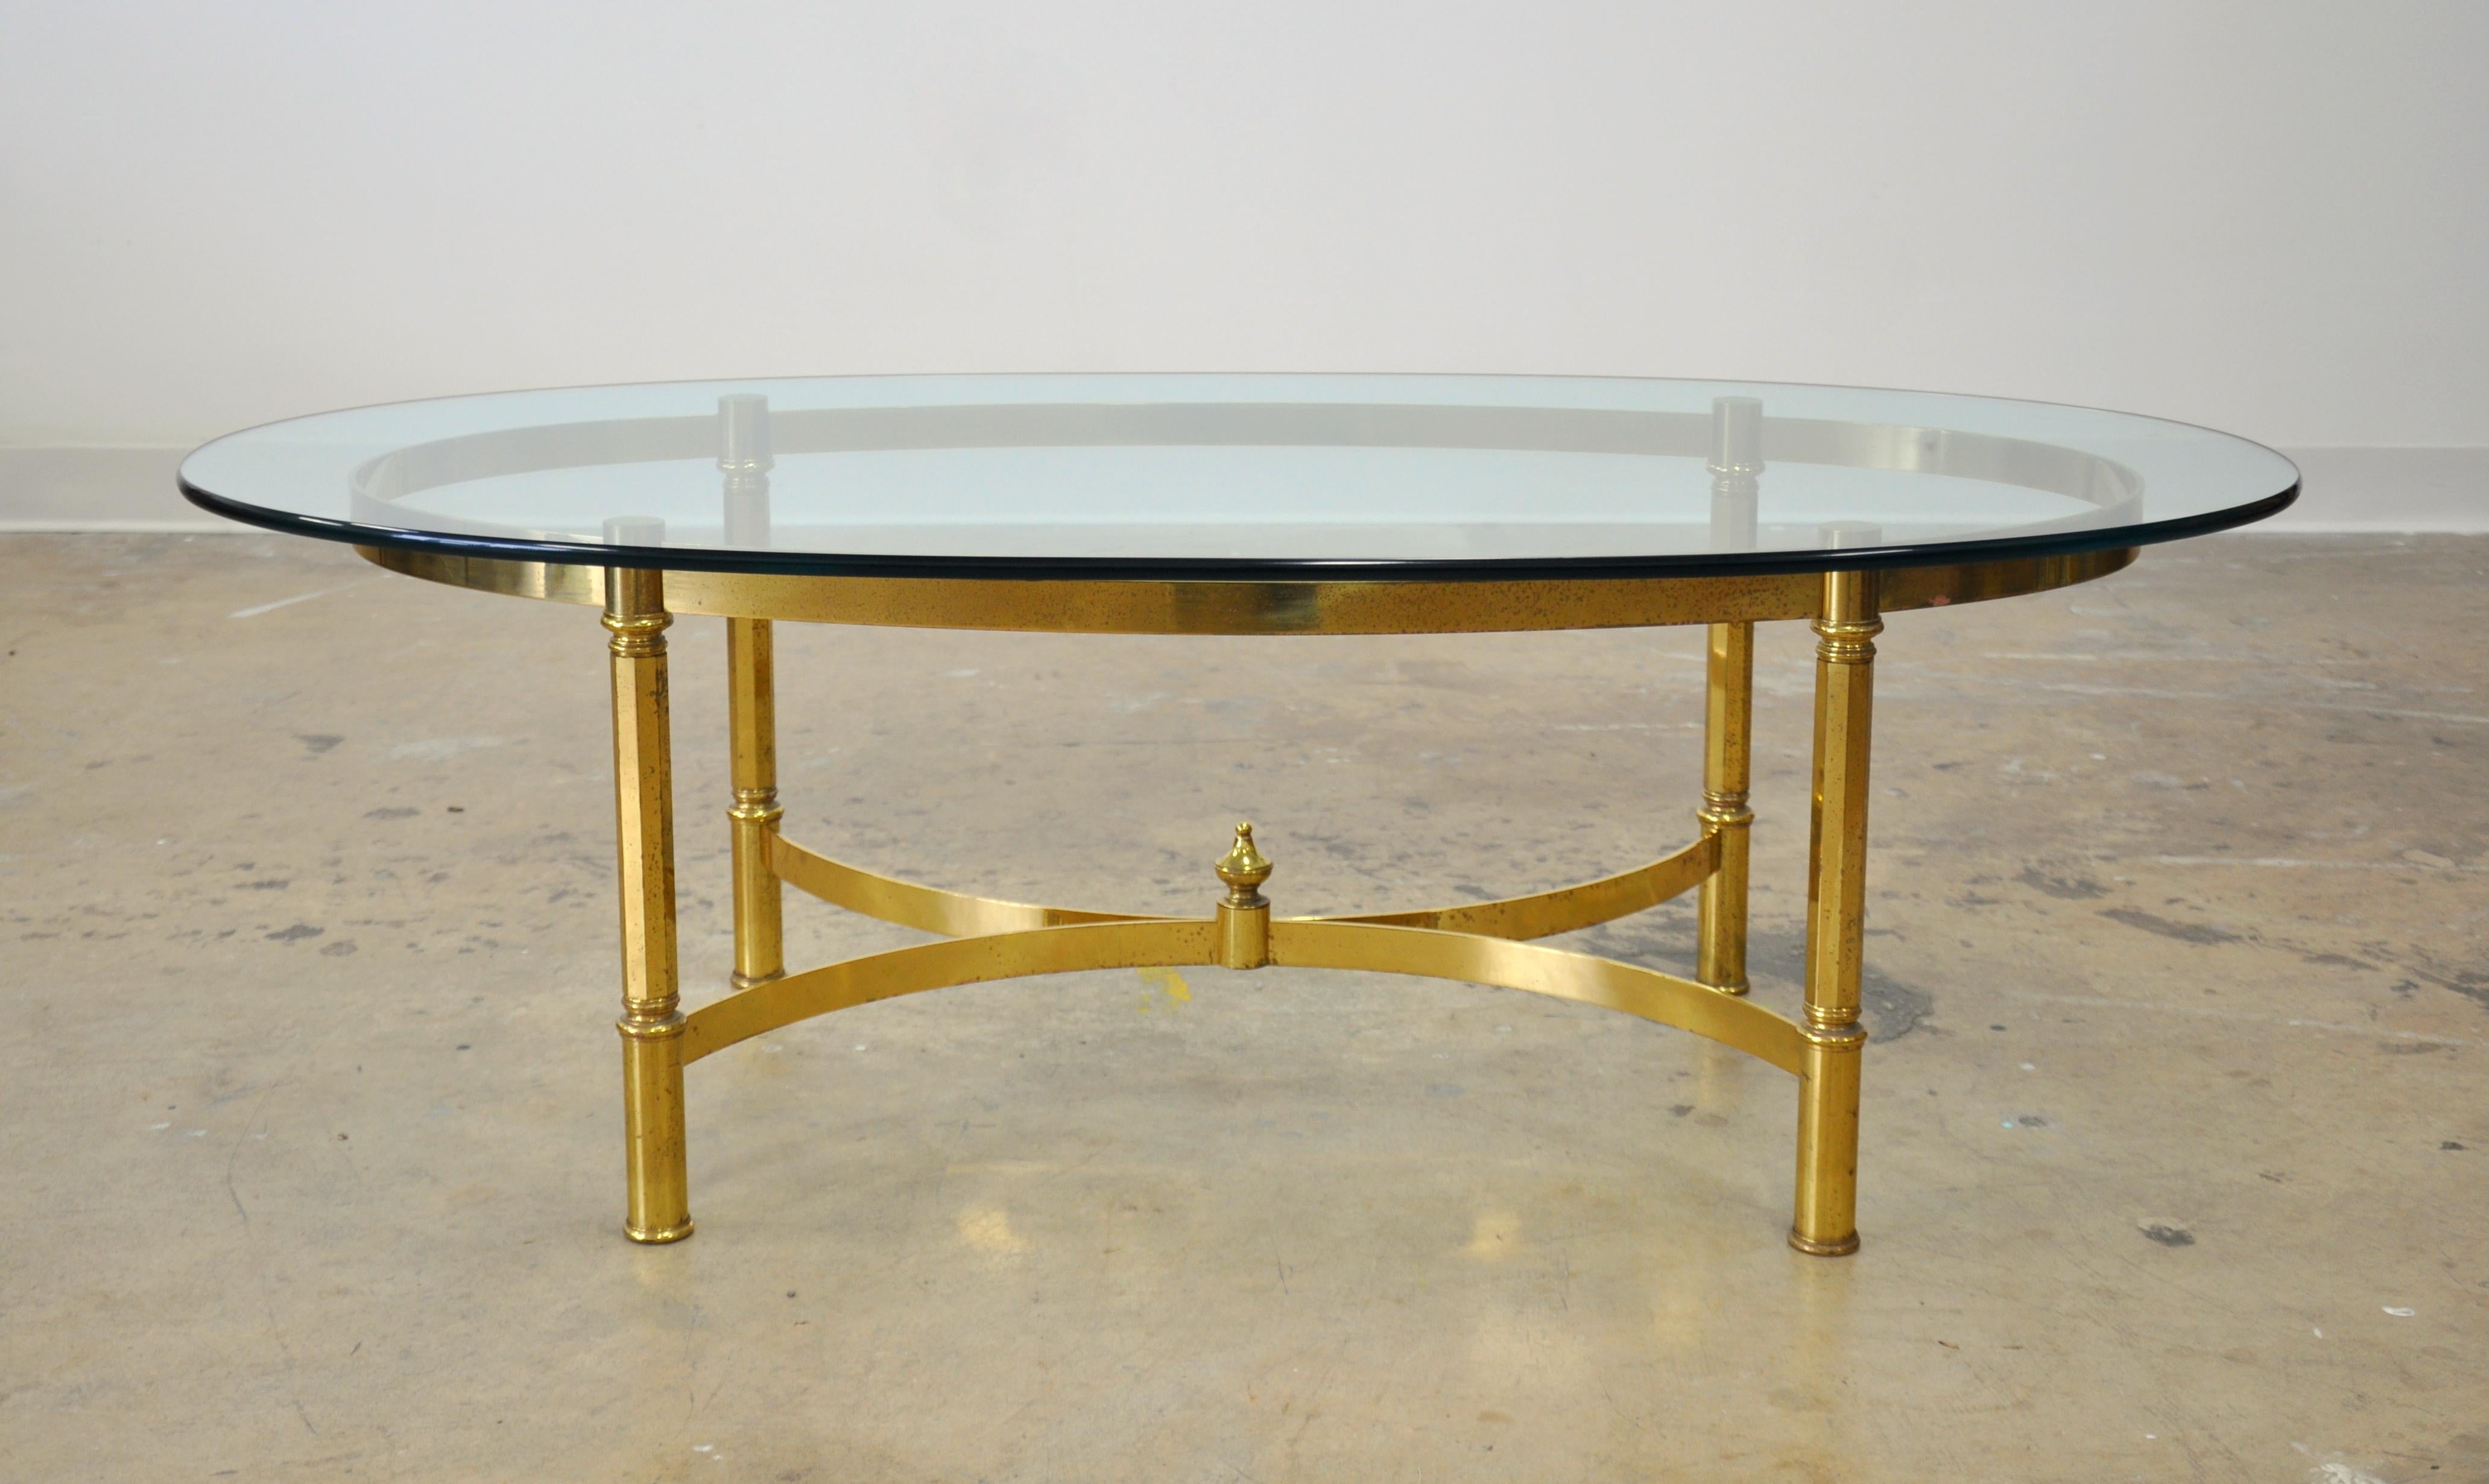 Vintage Mid-Century Modern brass cocktail table, with glass top. The Hollywood Regency table features a removable clear glass top, curved stretcher supports and decorative brass accents. Stamped 